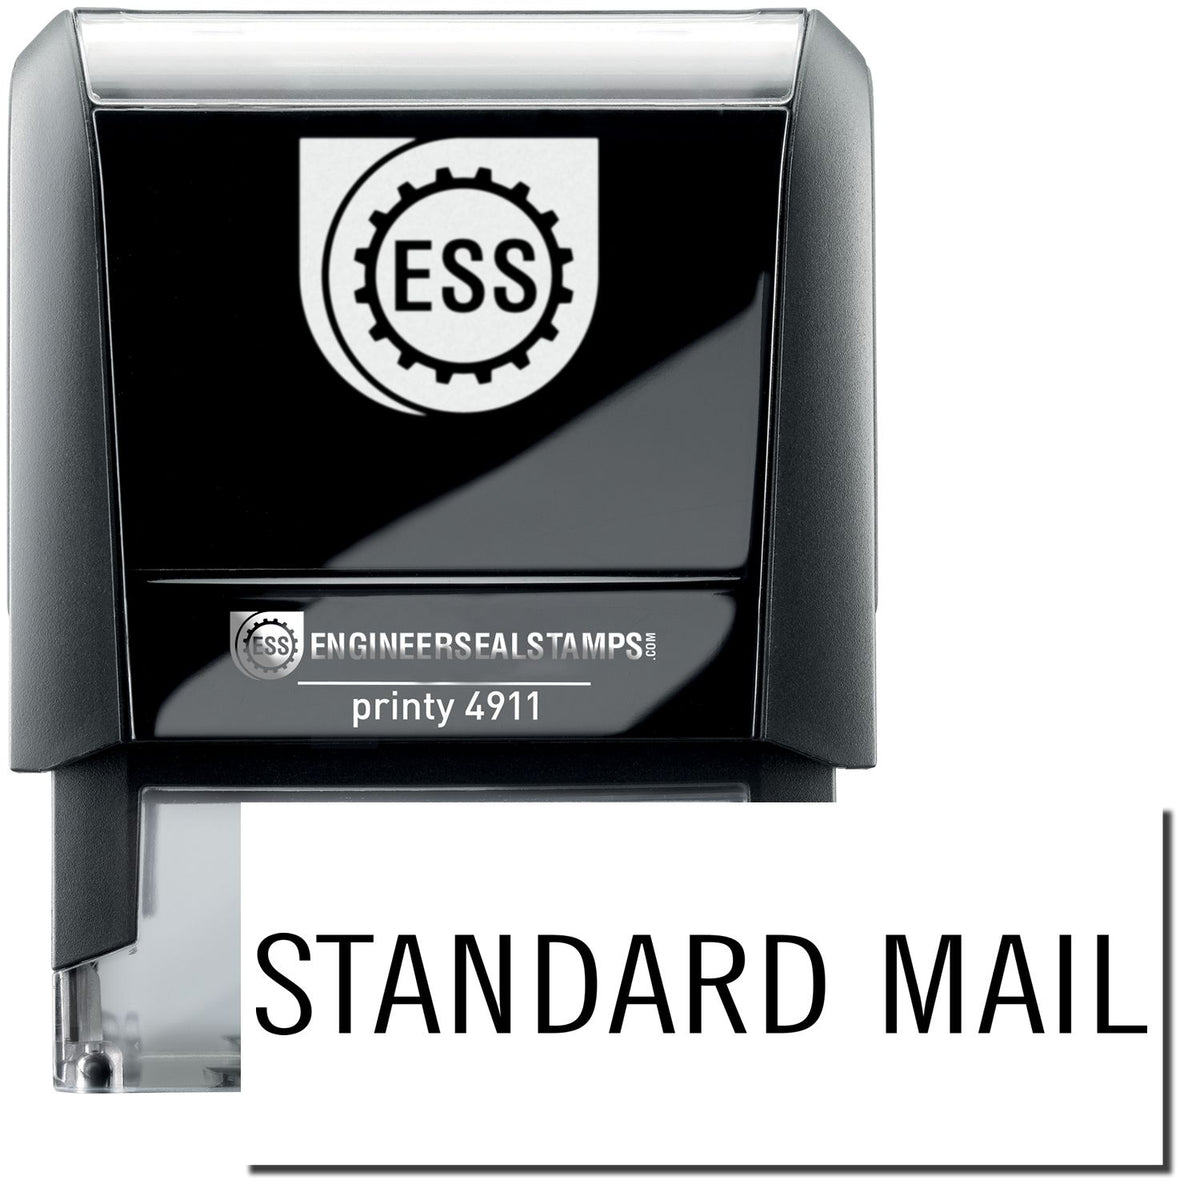 A self-inking stamp with a stamped image showing how the text &quot;STANDARD MAIL&quot; is displayed after stamping.